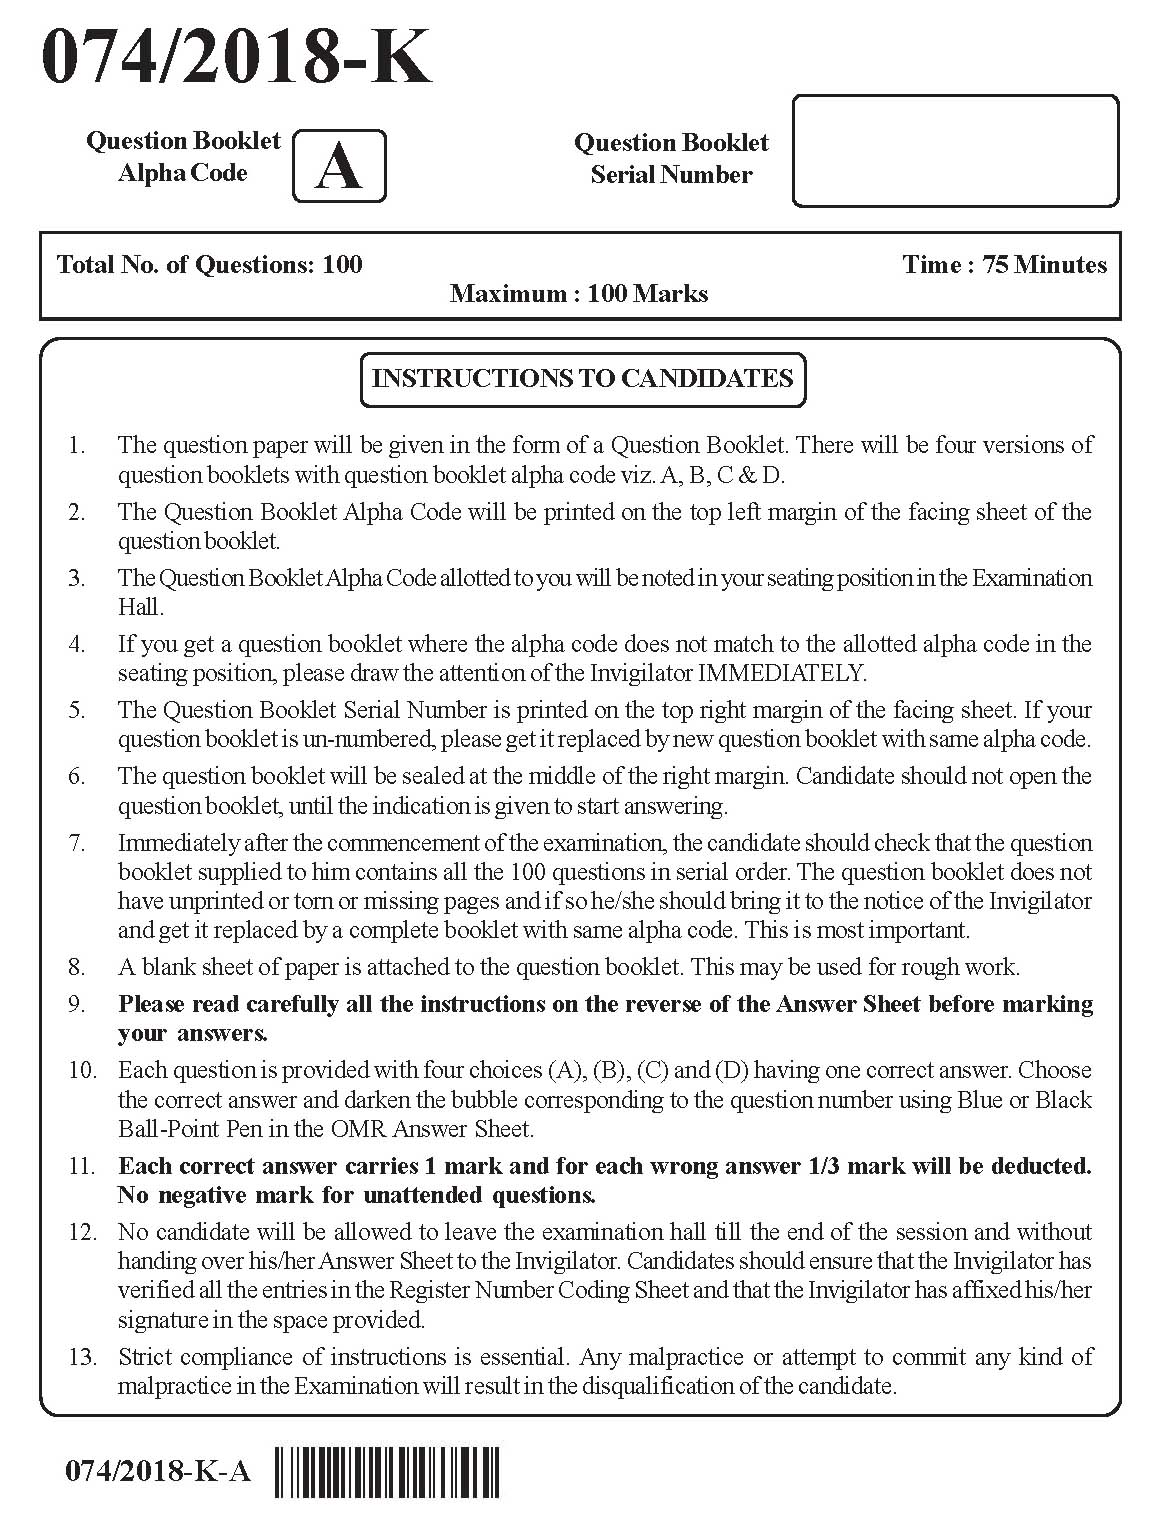 Kerala PSC Police Constable Driver Exam Question Paper Code 0742018 K 1